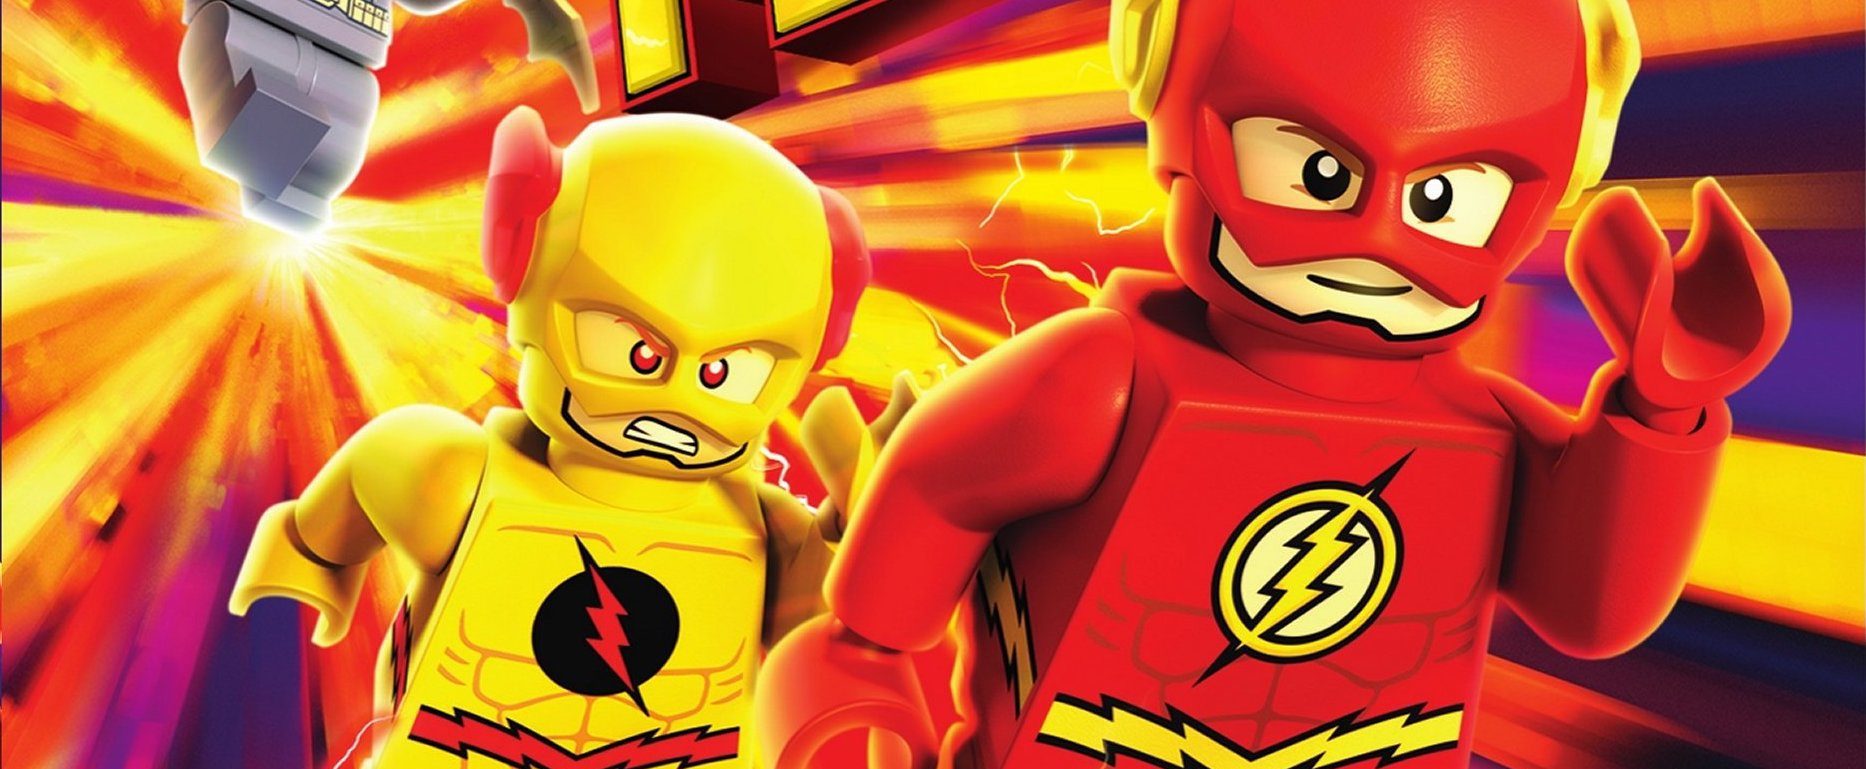 Lego DC Super Heroes: The Flash Review